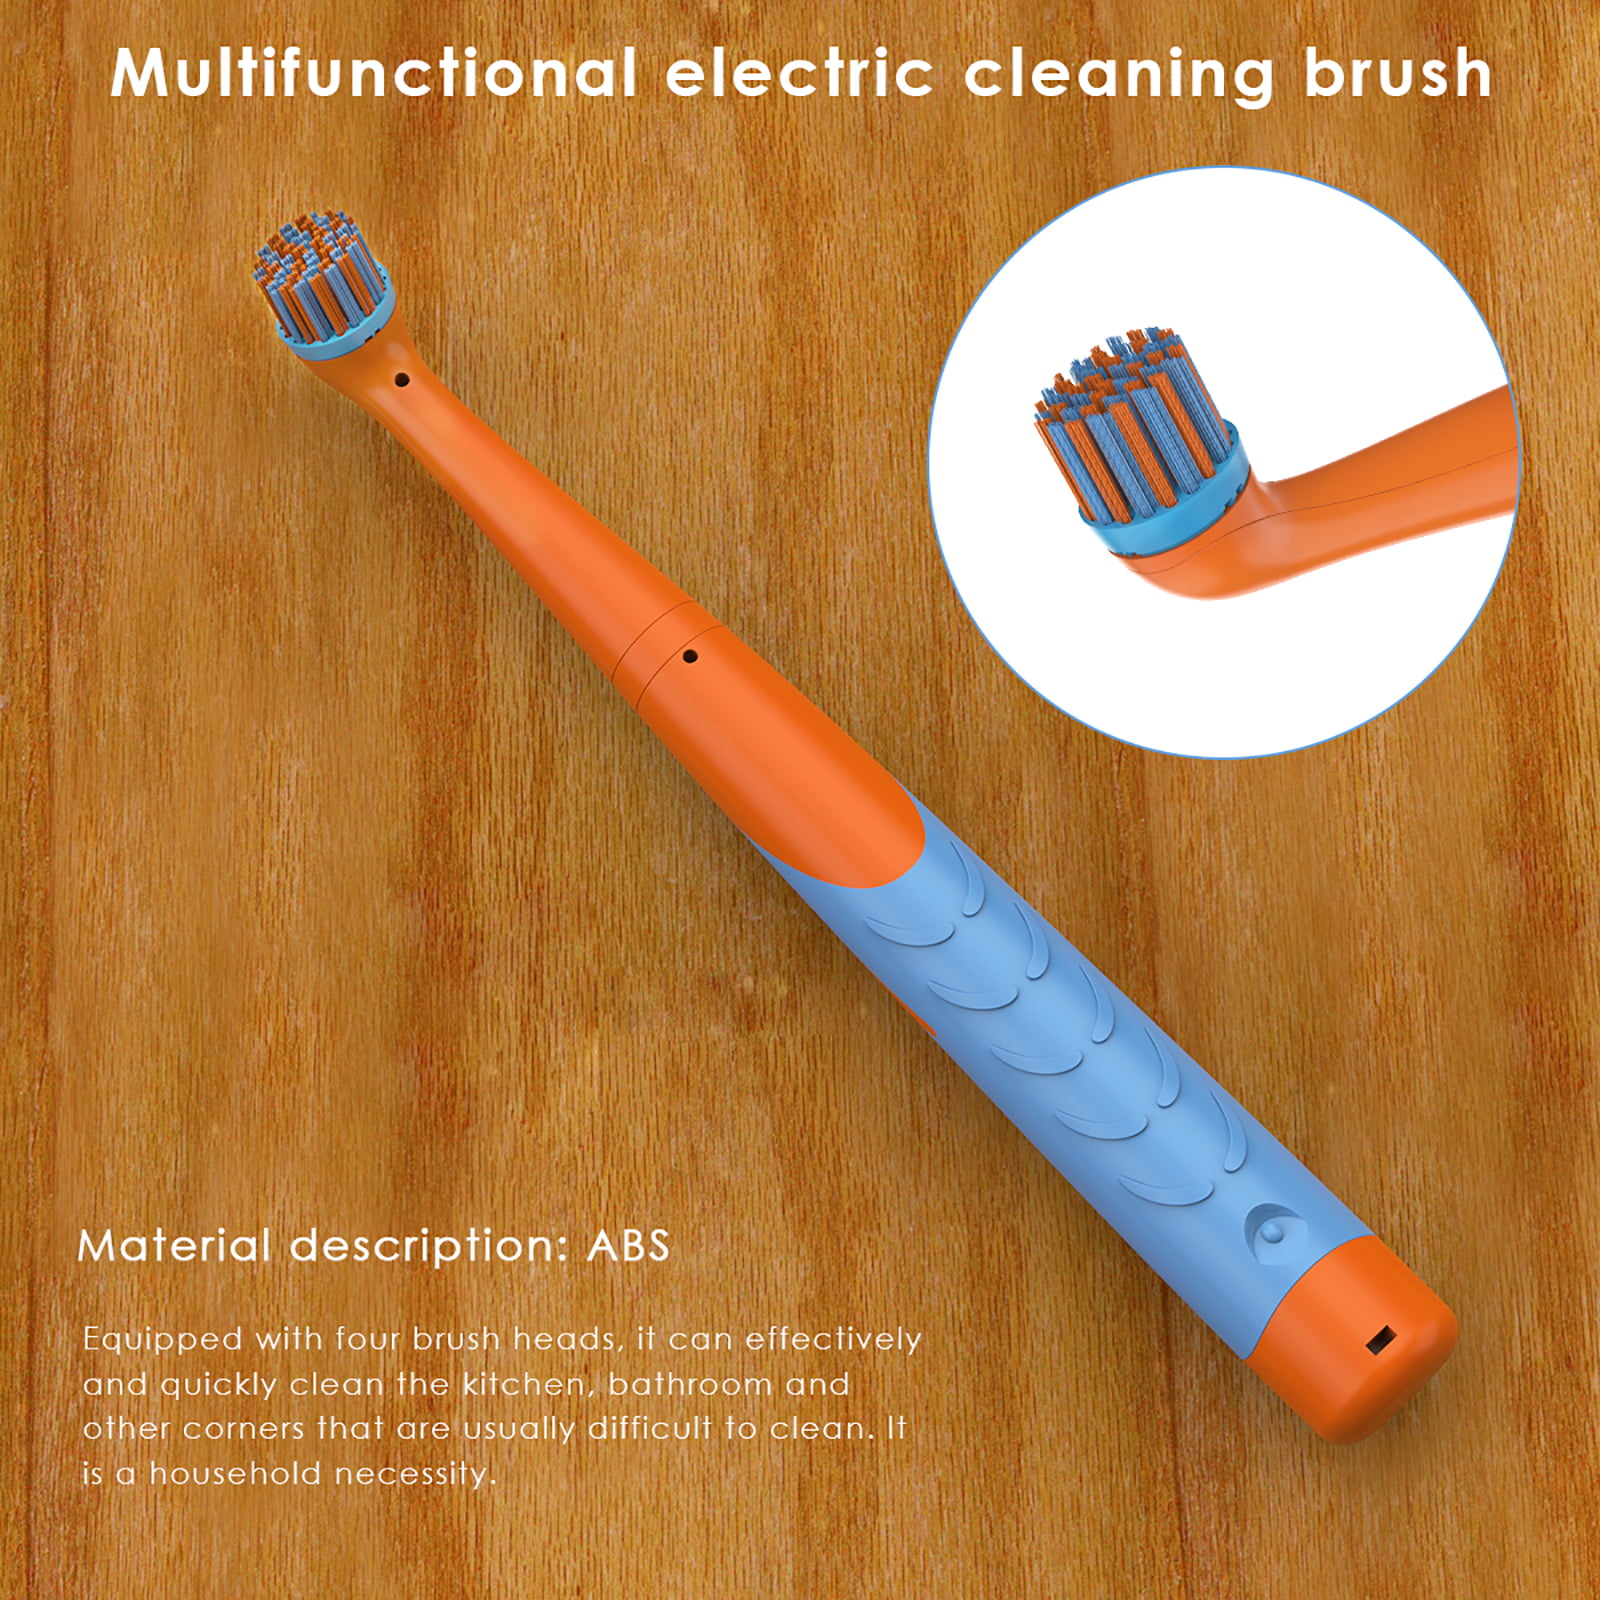 Yolispa Electric Cleaning Brush 4 in 1 Sonic Power Scrubber Brush Automatic Cleaner for Bathroom Kitchen Tile Floor Shoes Household Cleaning